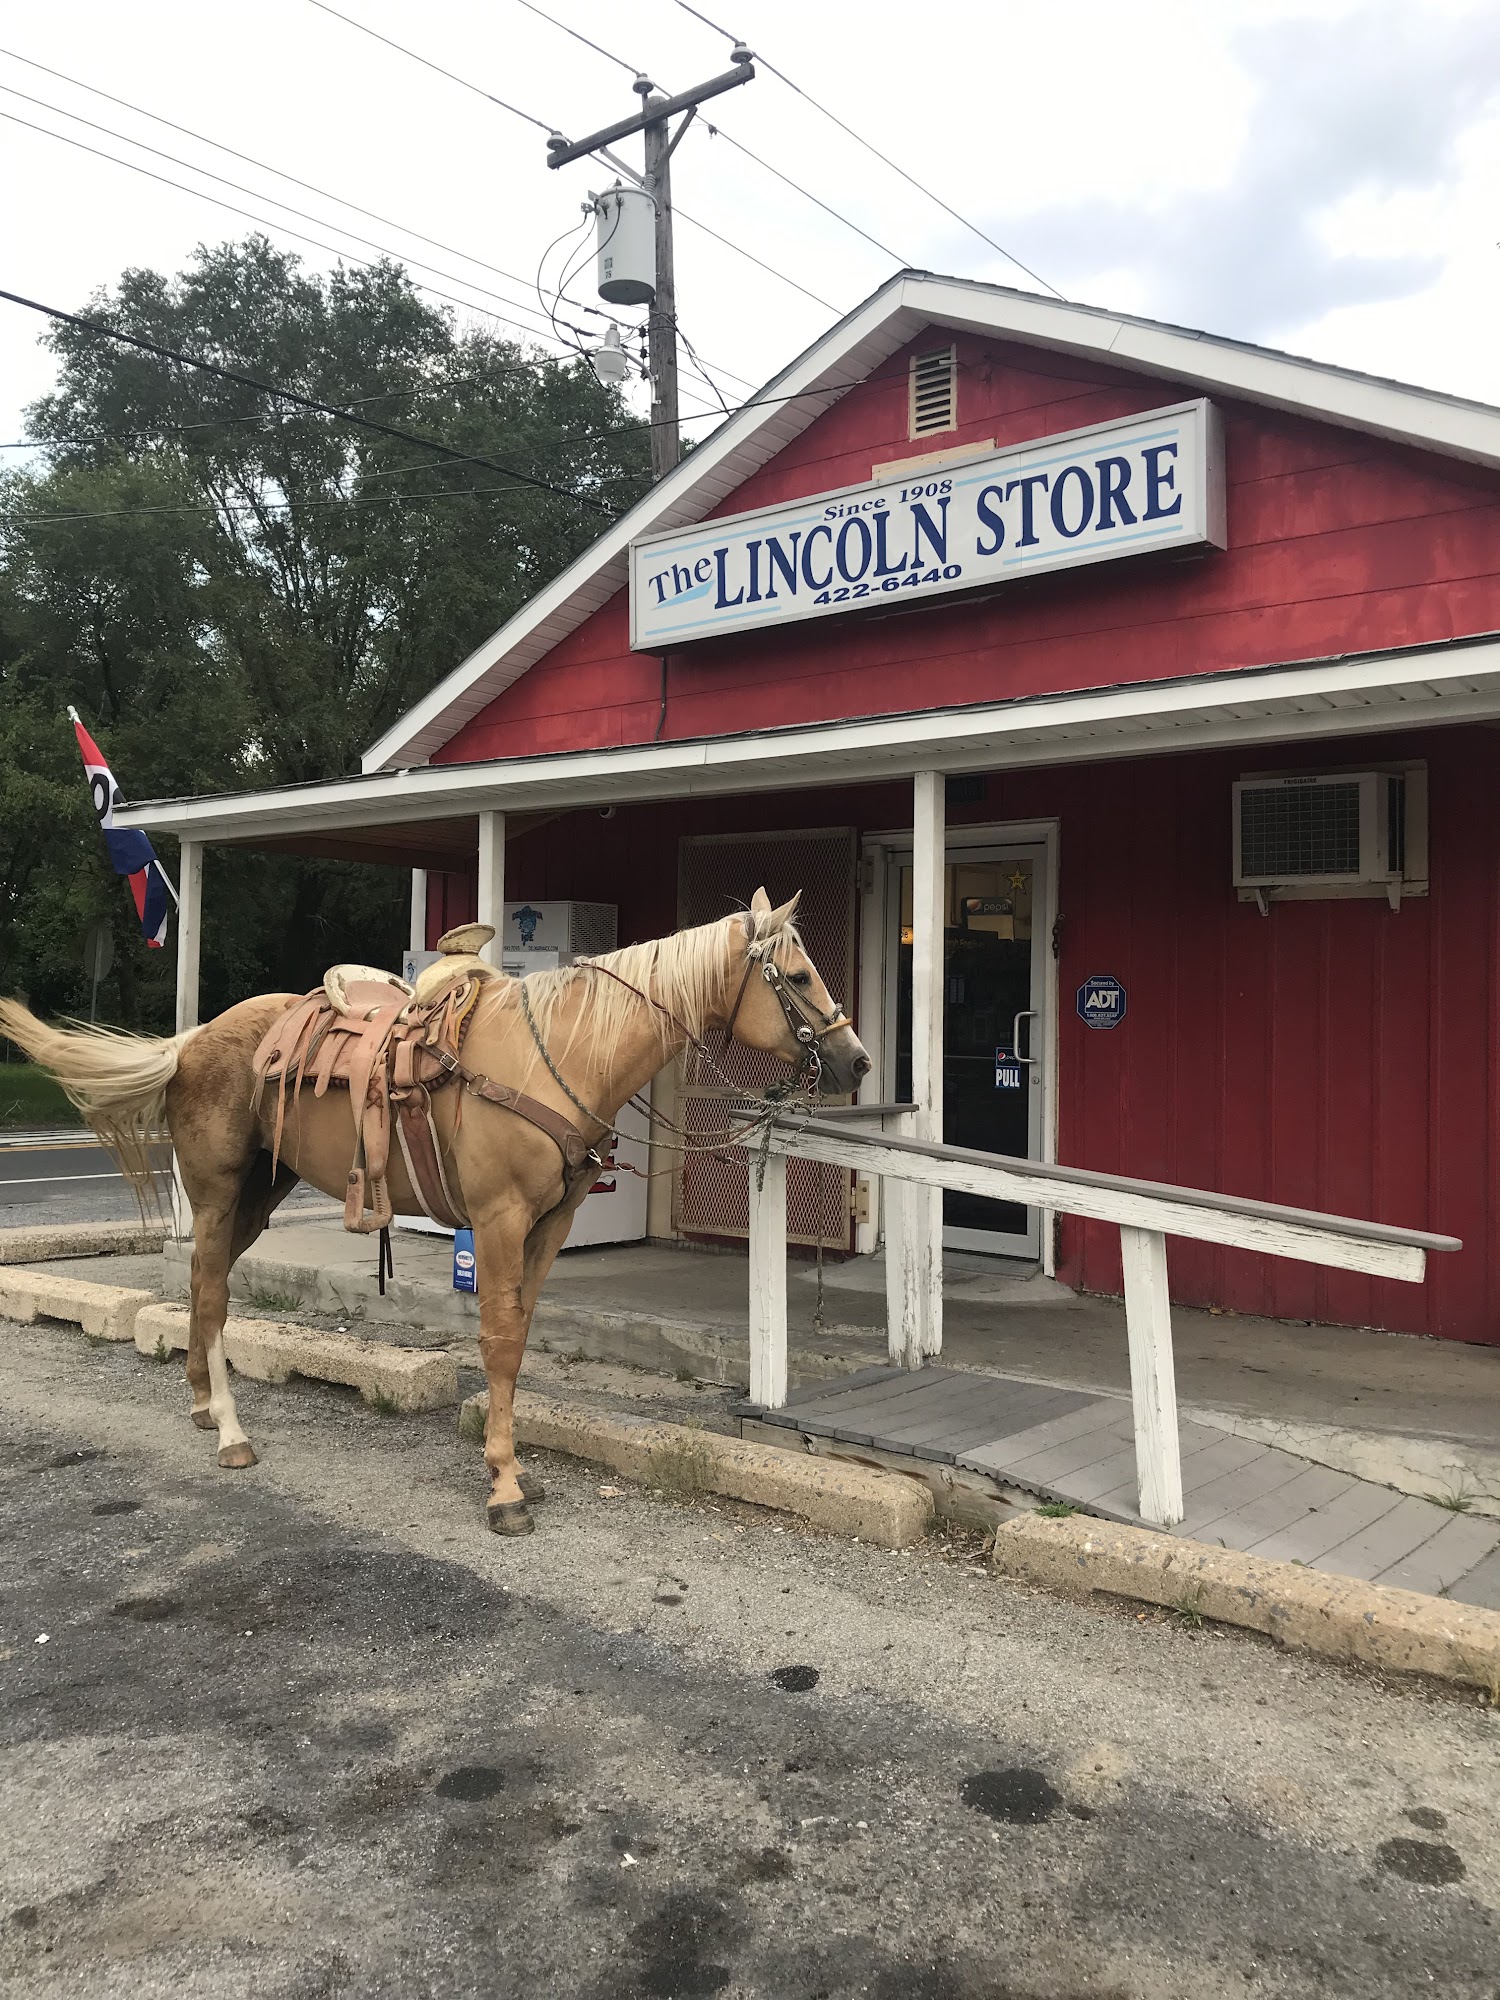 Little Lincoln Store